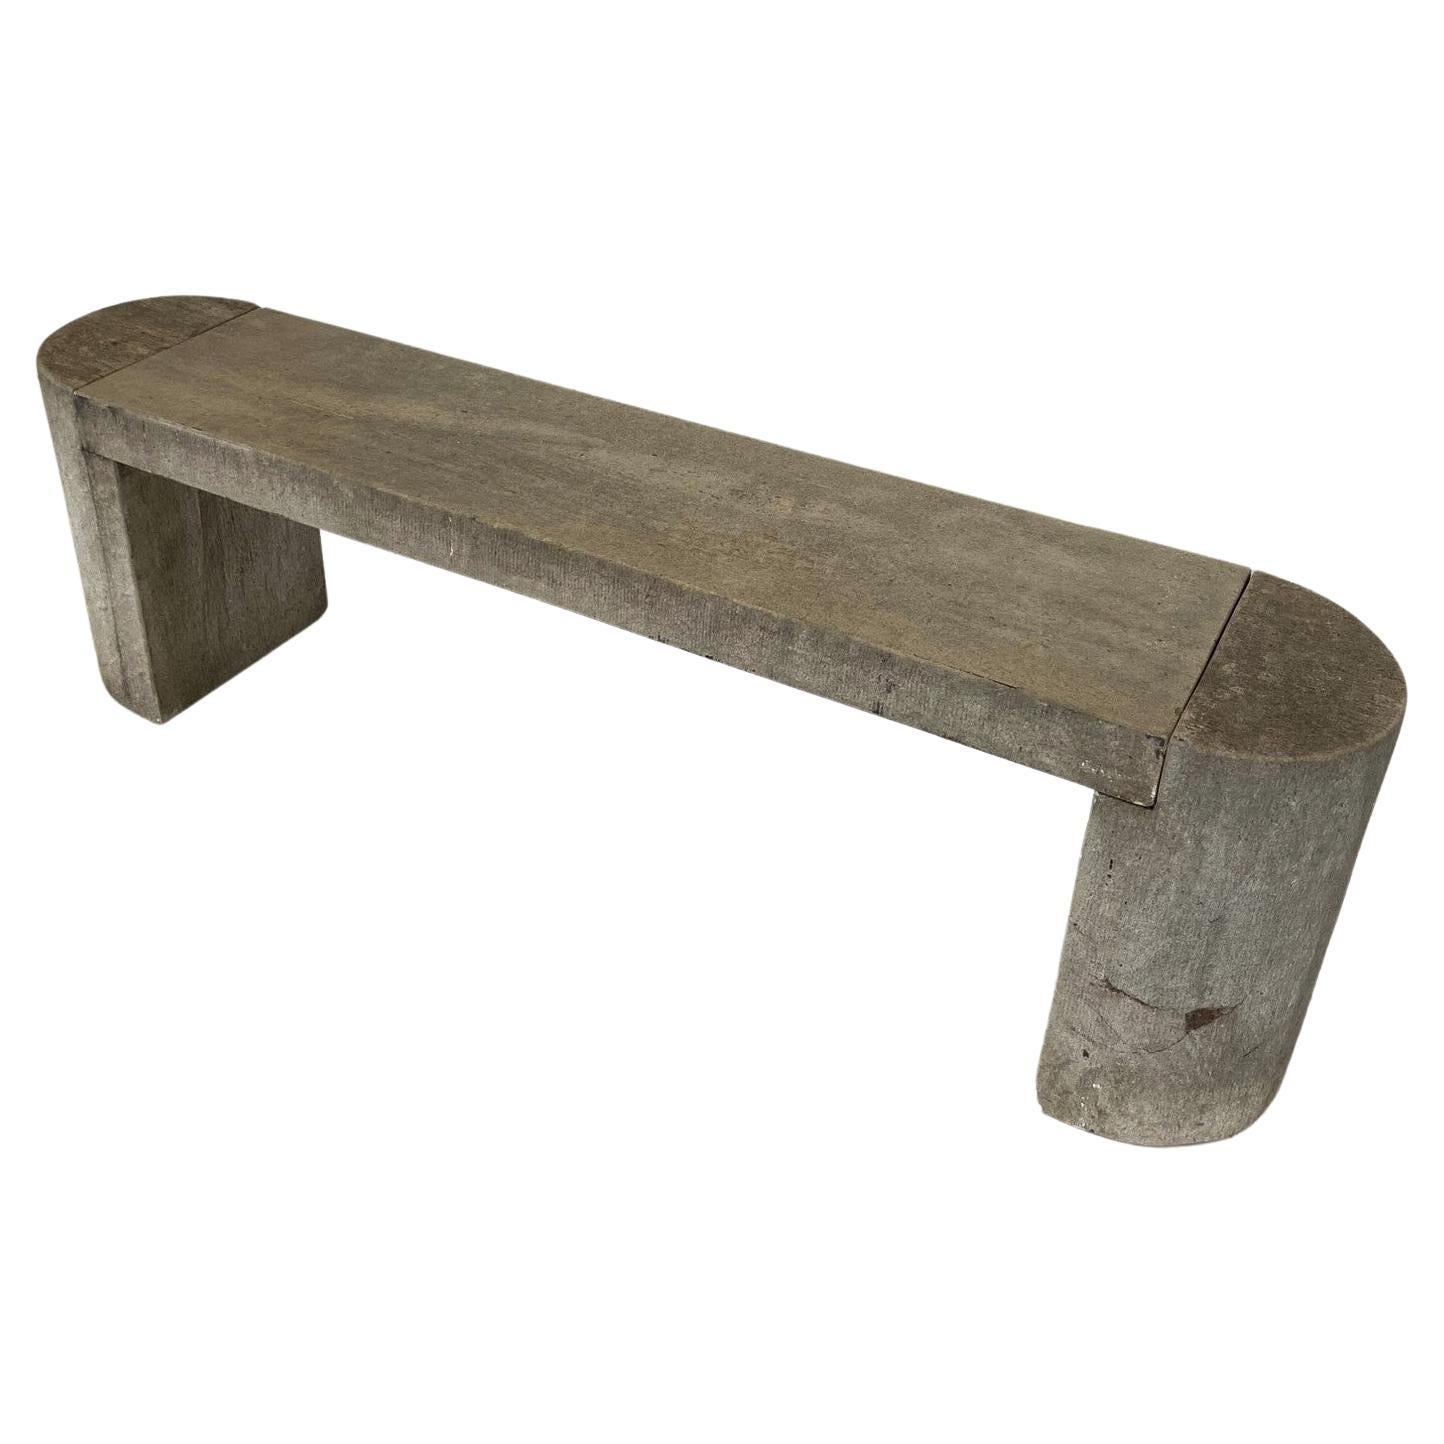 Modernist Polished Stone Concrete Bench Seat with Aged Patina For Sale